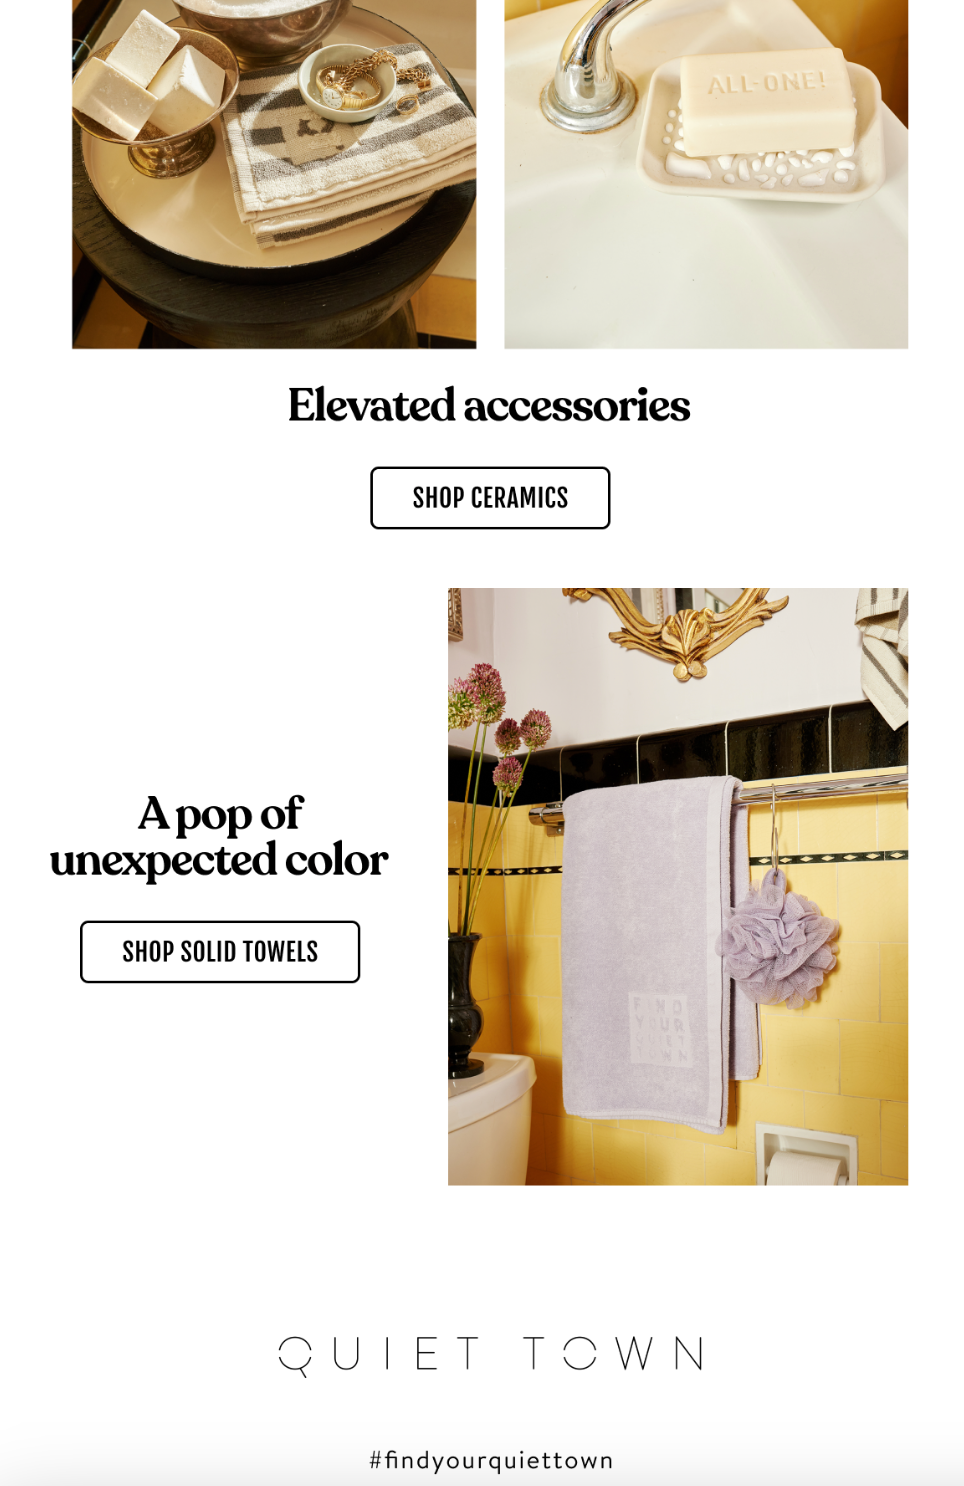 Quiet Town's marketing email shows how the brand's products can elevate a bathroom's decor. Third Panel